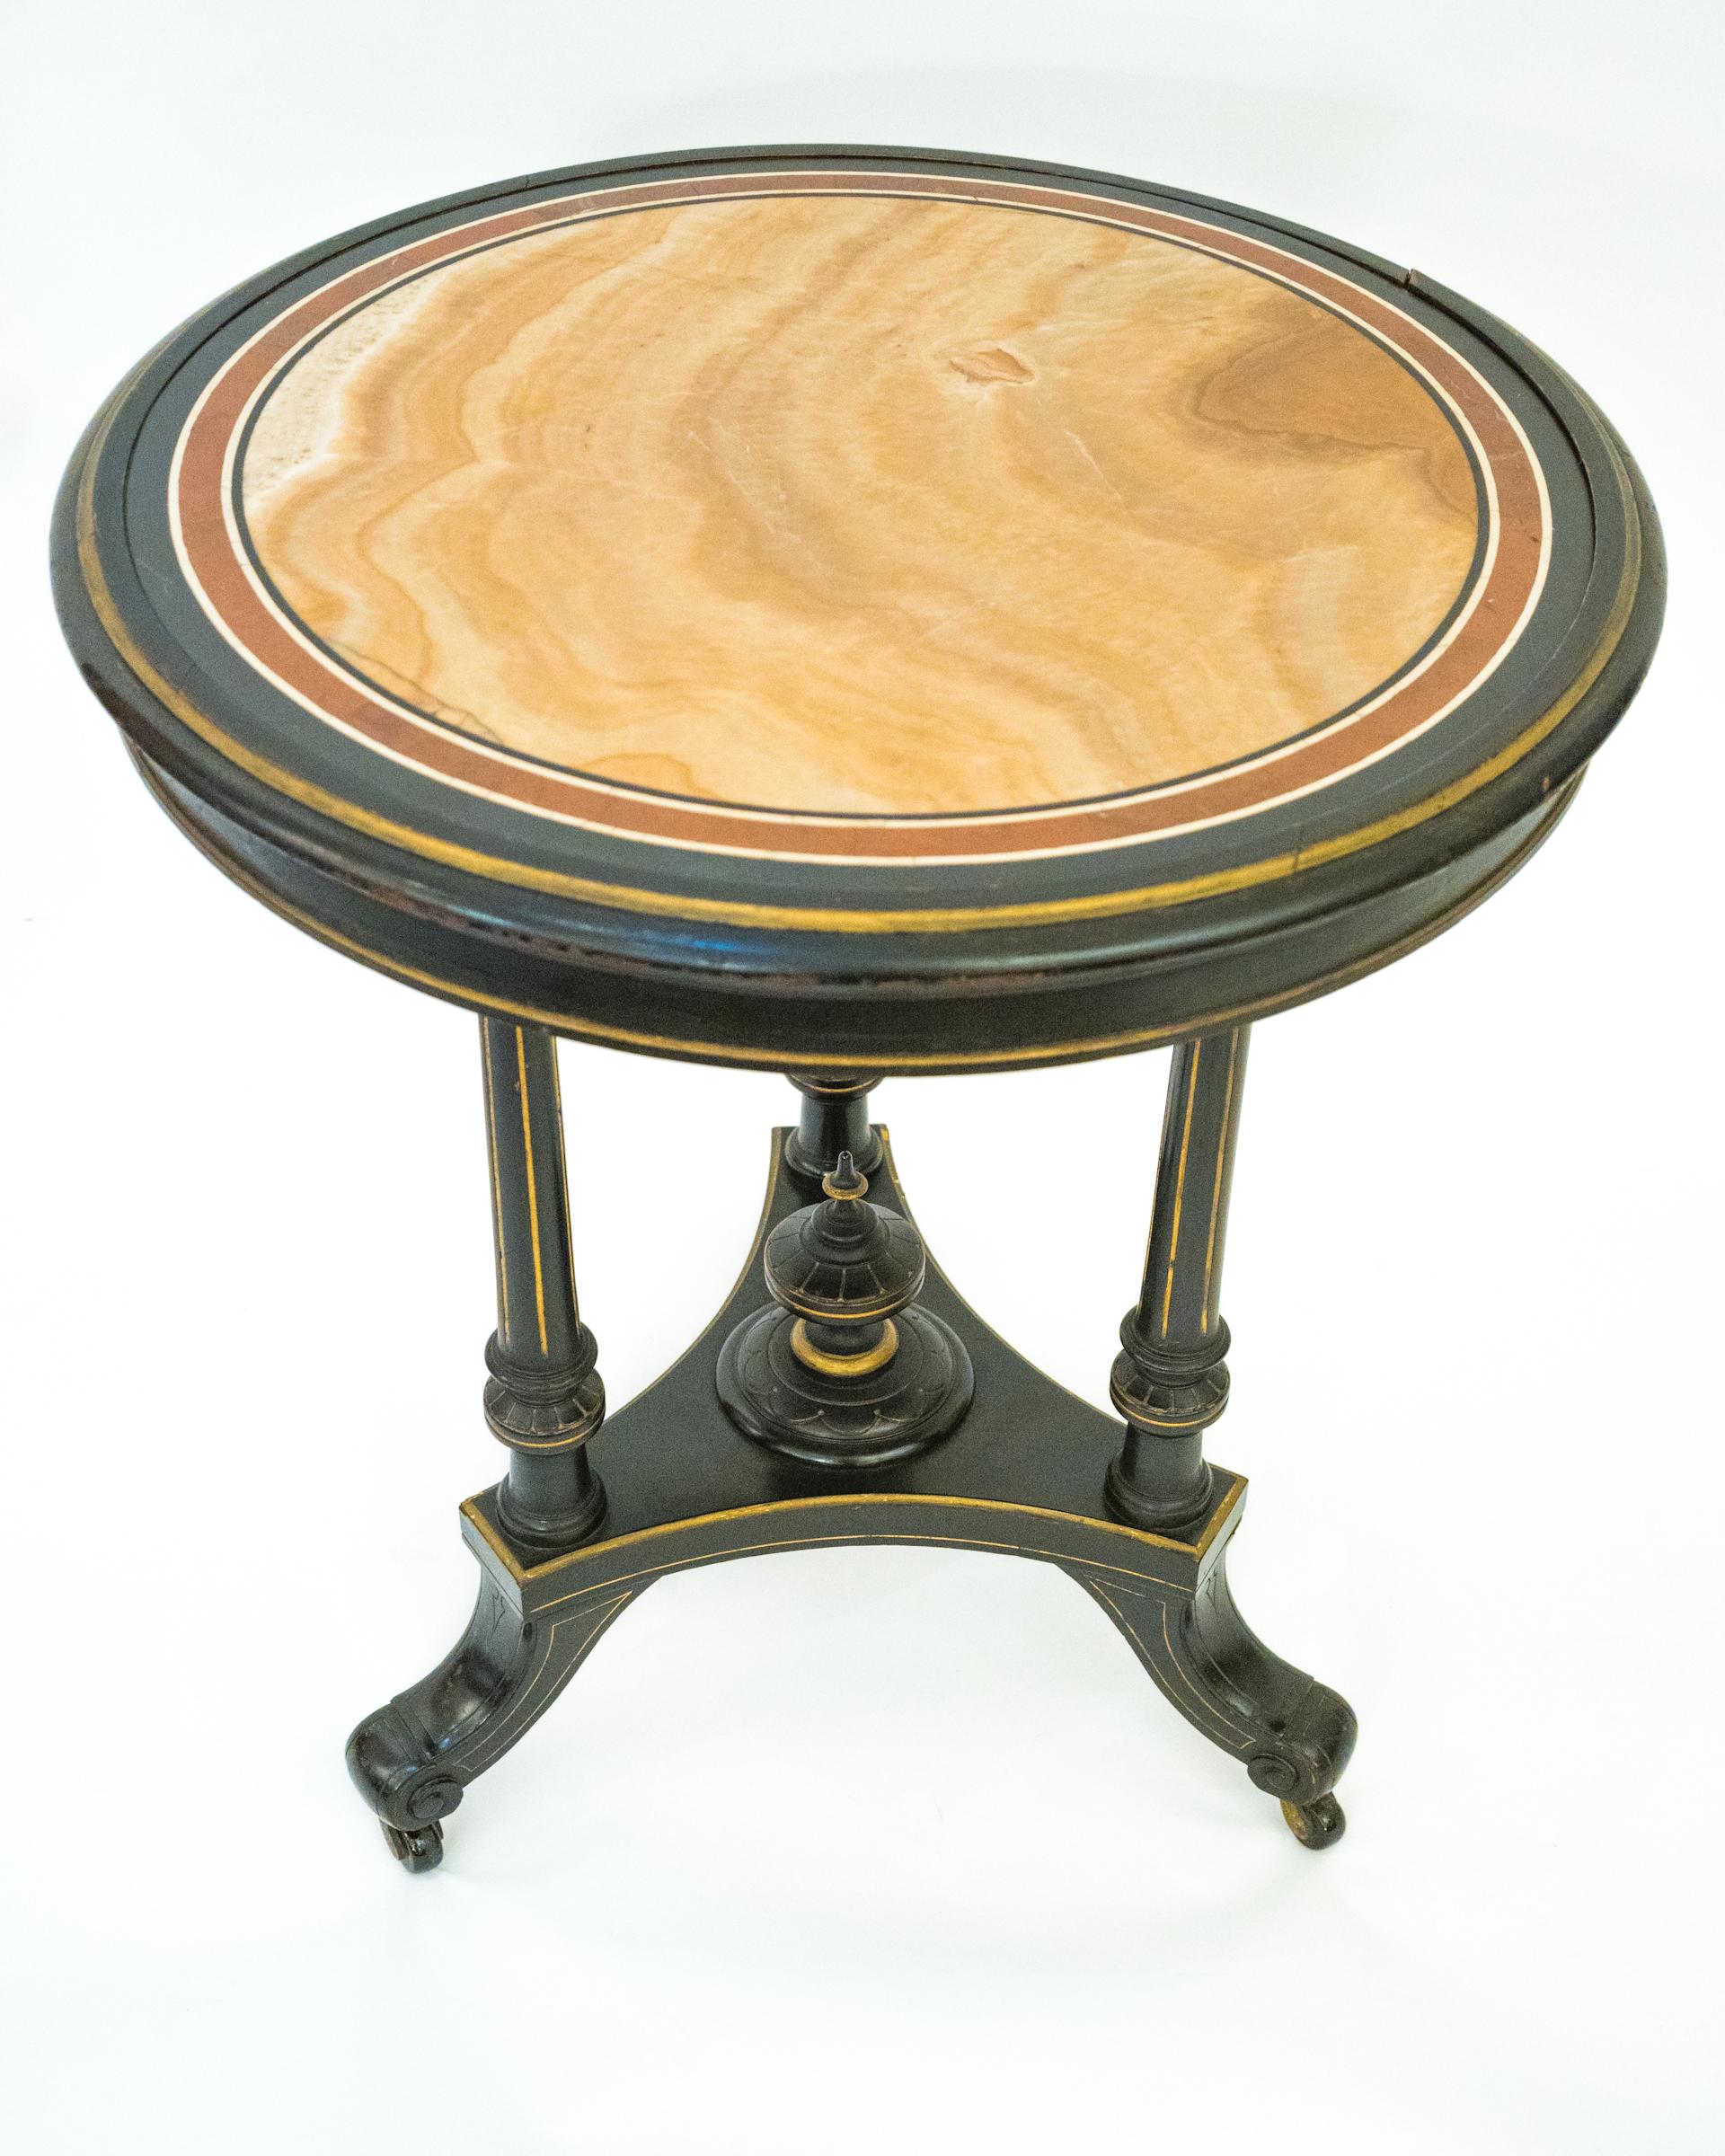 An American Greek Revival side table with 3 tapered fluted round legs supported by triangular plinth supported by splayed legs and having center finial. The ebonized frame with gilt details and specimen onyx top with contrasting red, cream, and